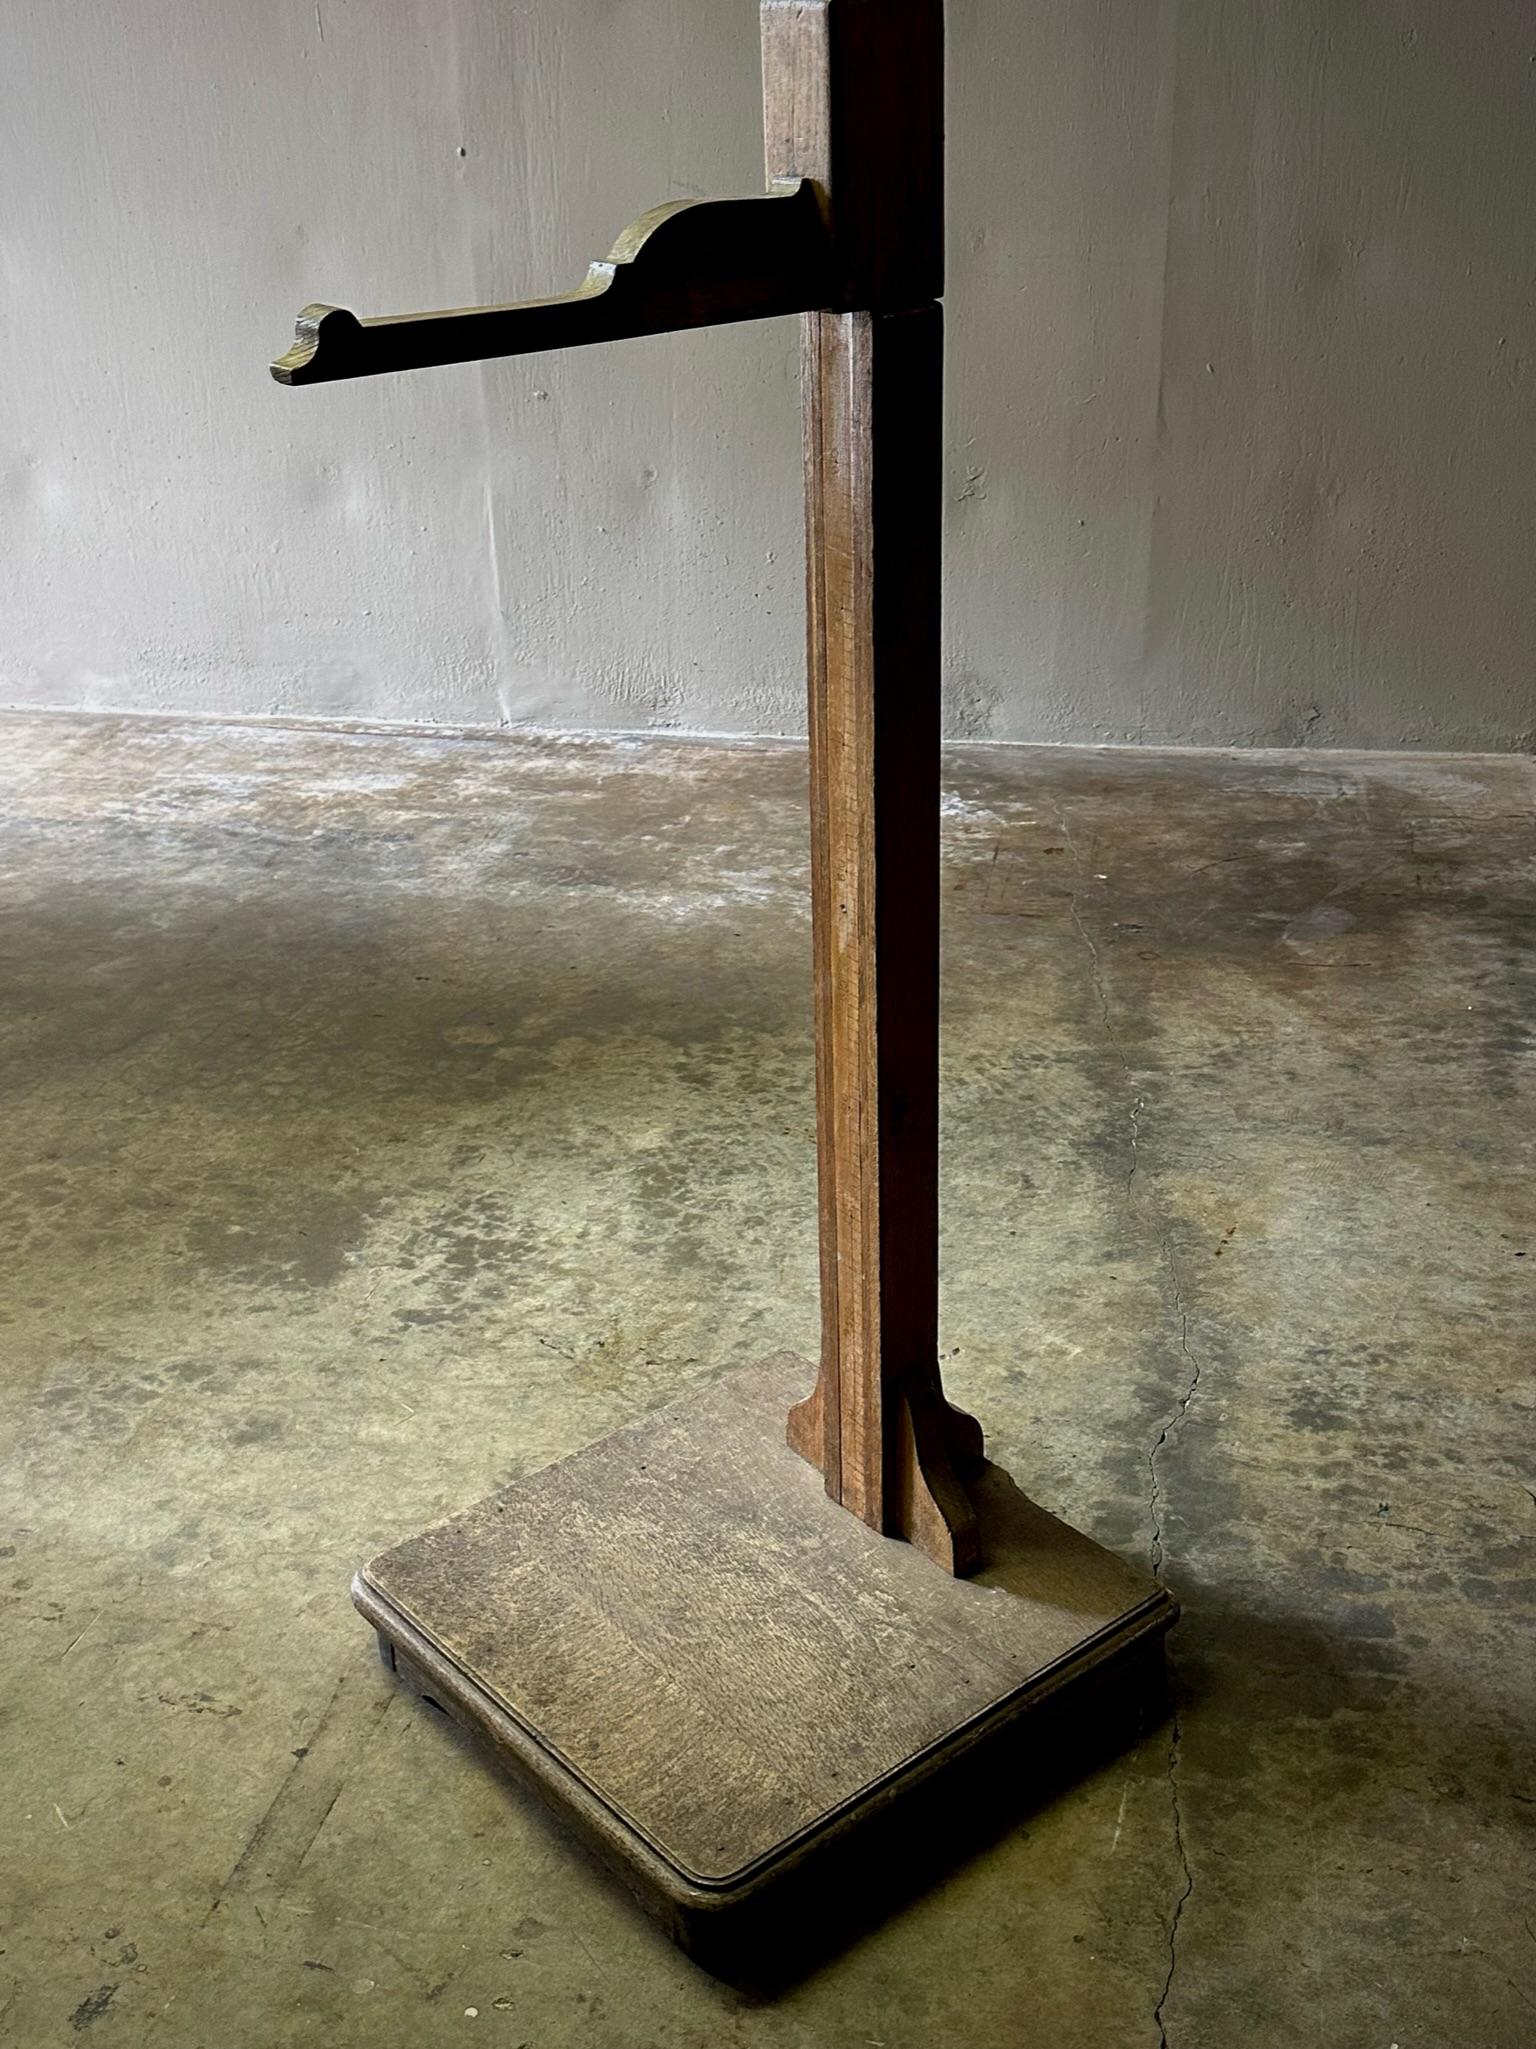 Measuring stand in wood

France, circa 1900

Dimensions: 20W x 20D x 95H